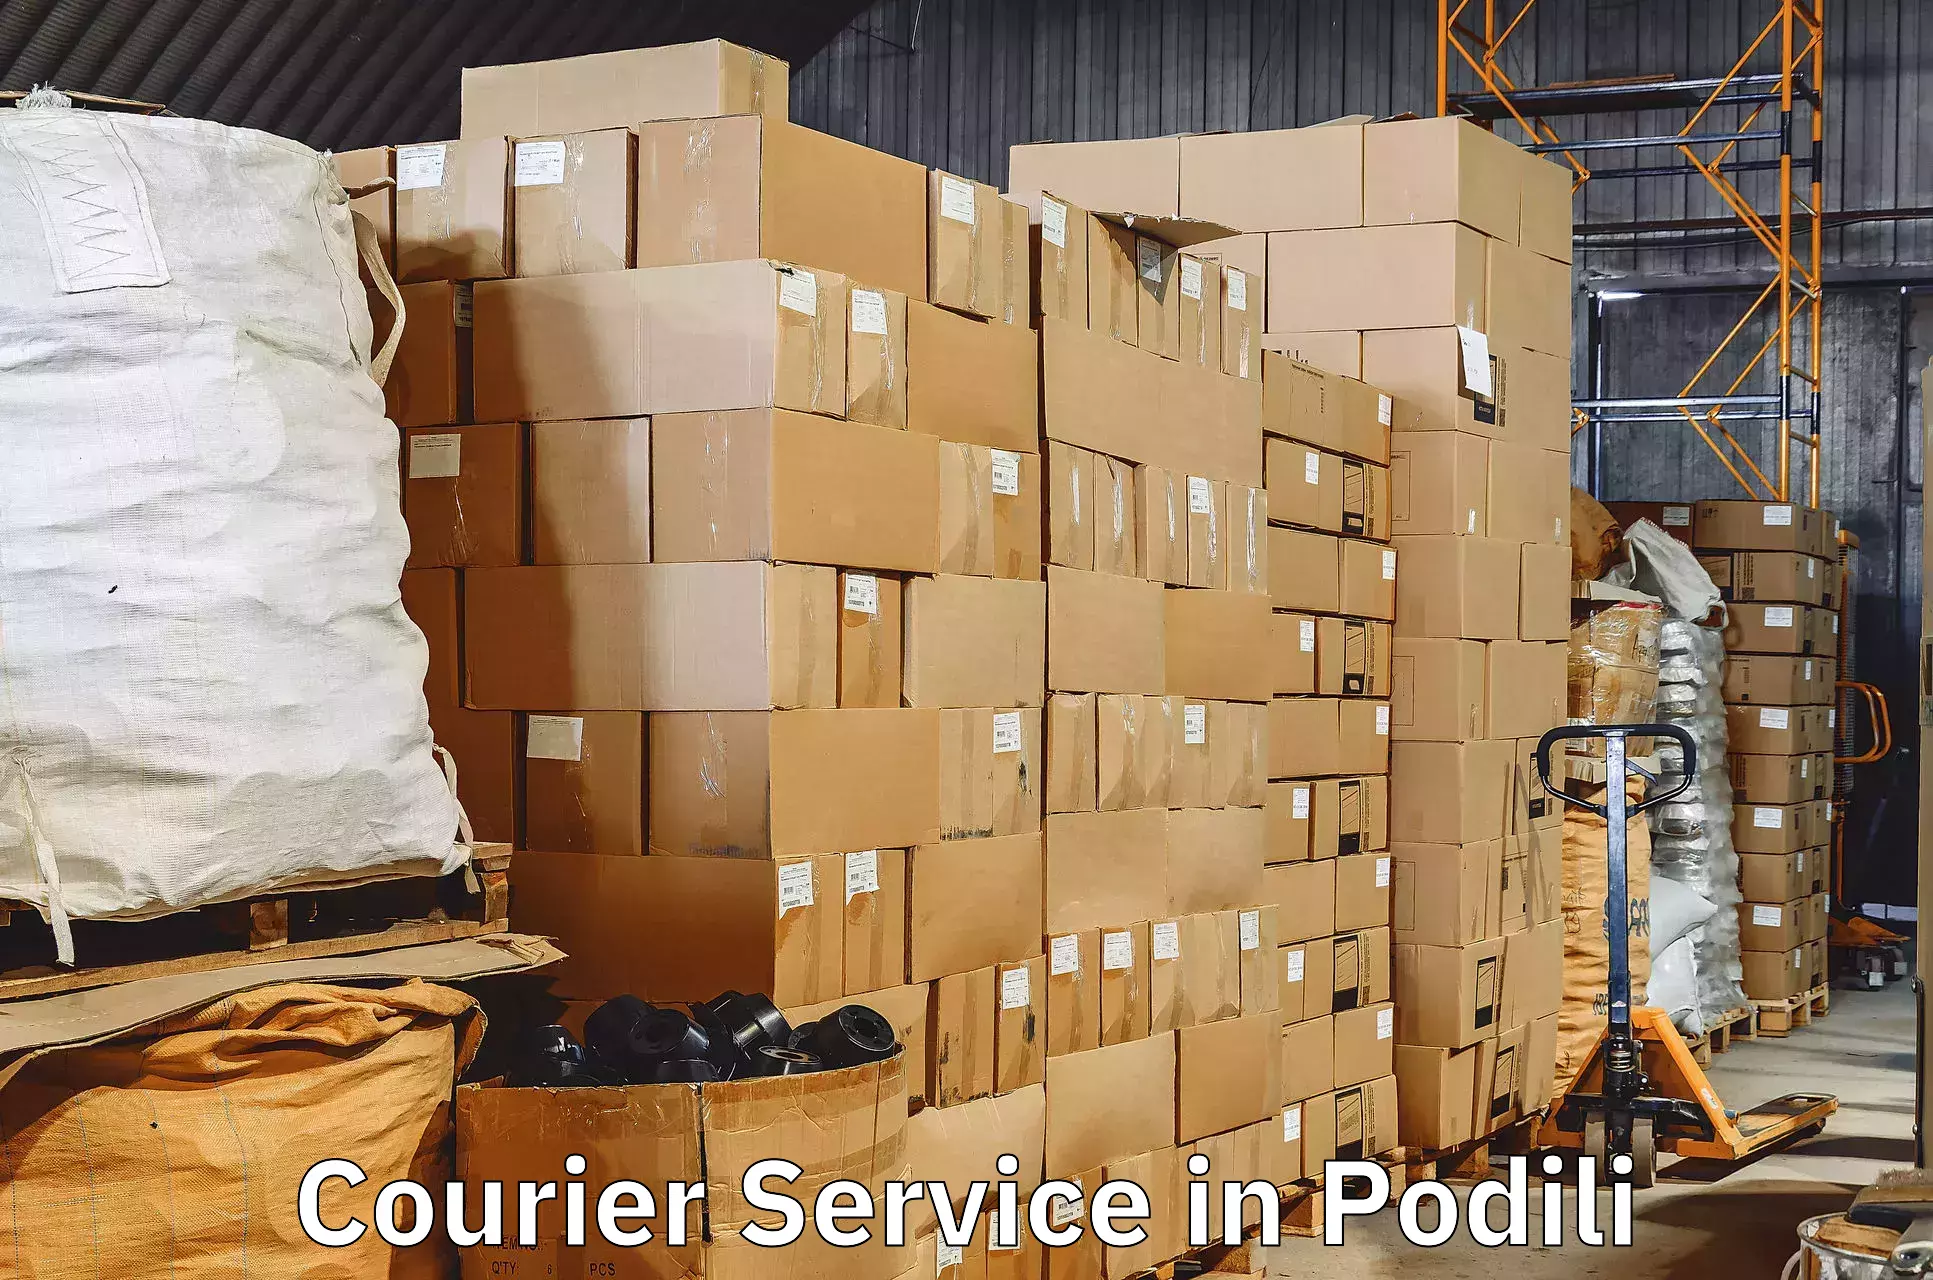 Customer-friendly courier services in Podili